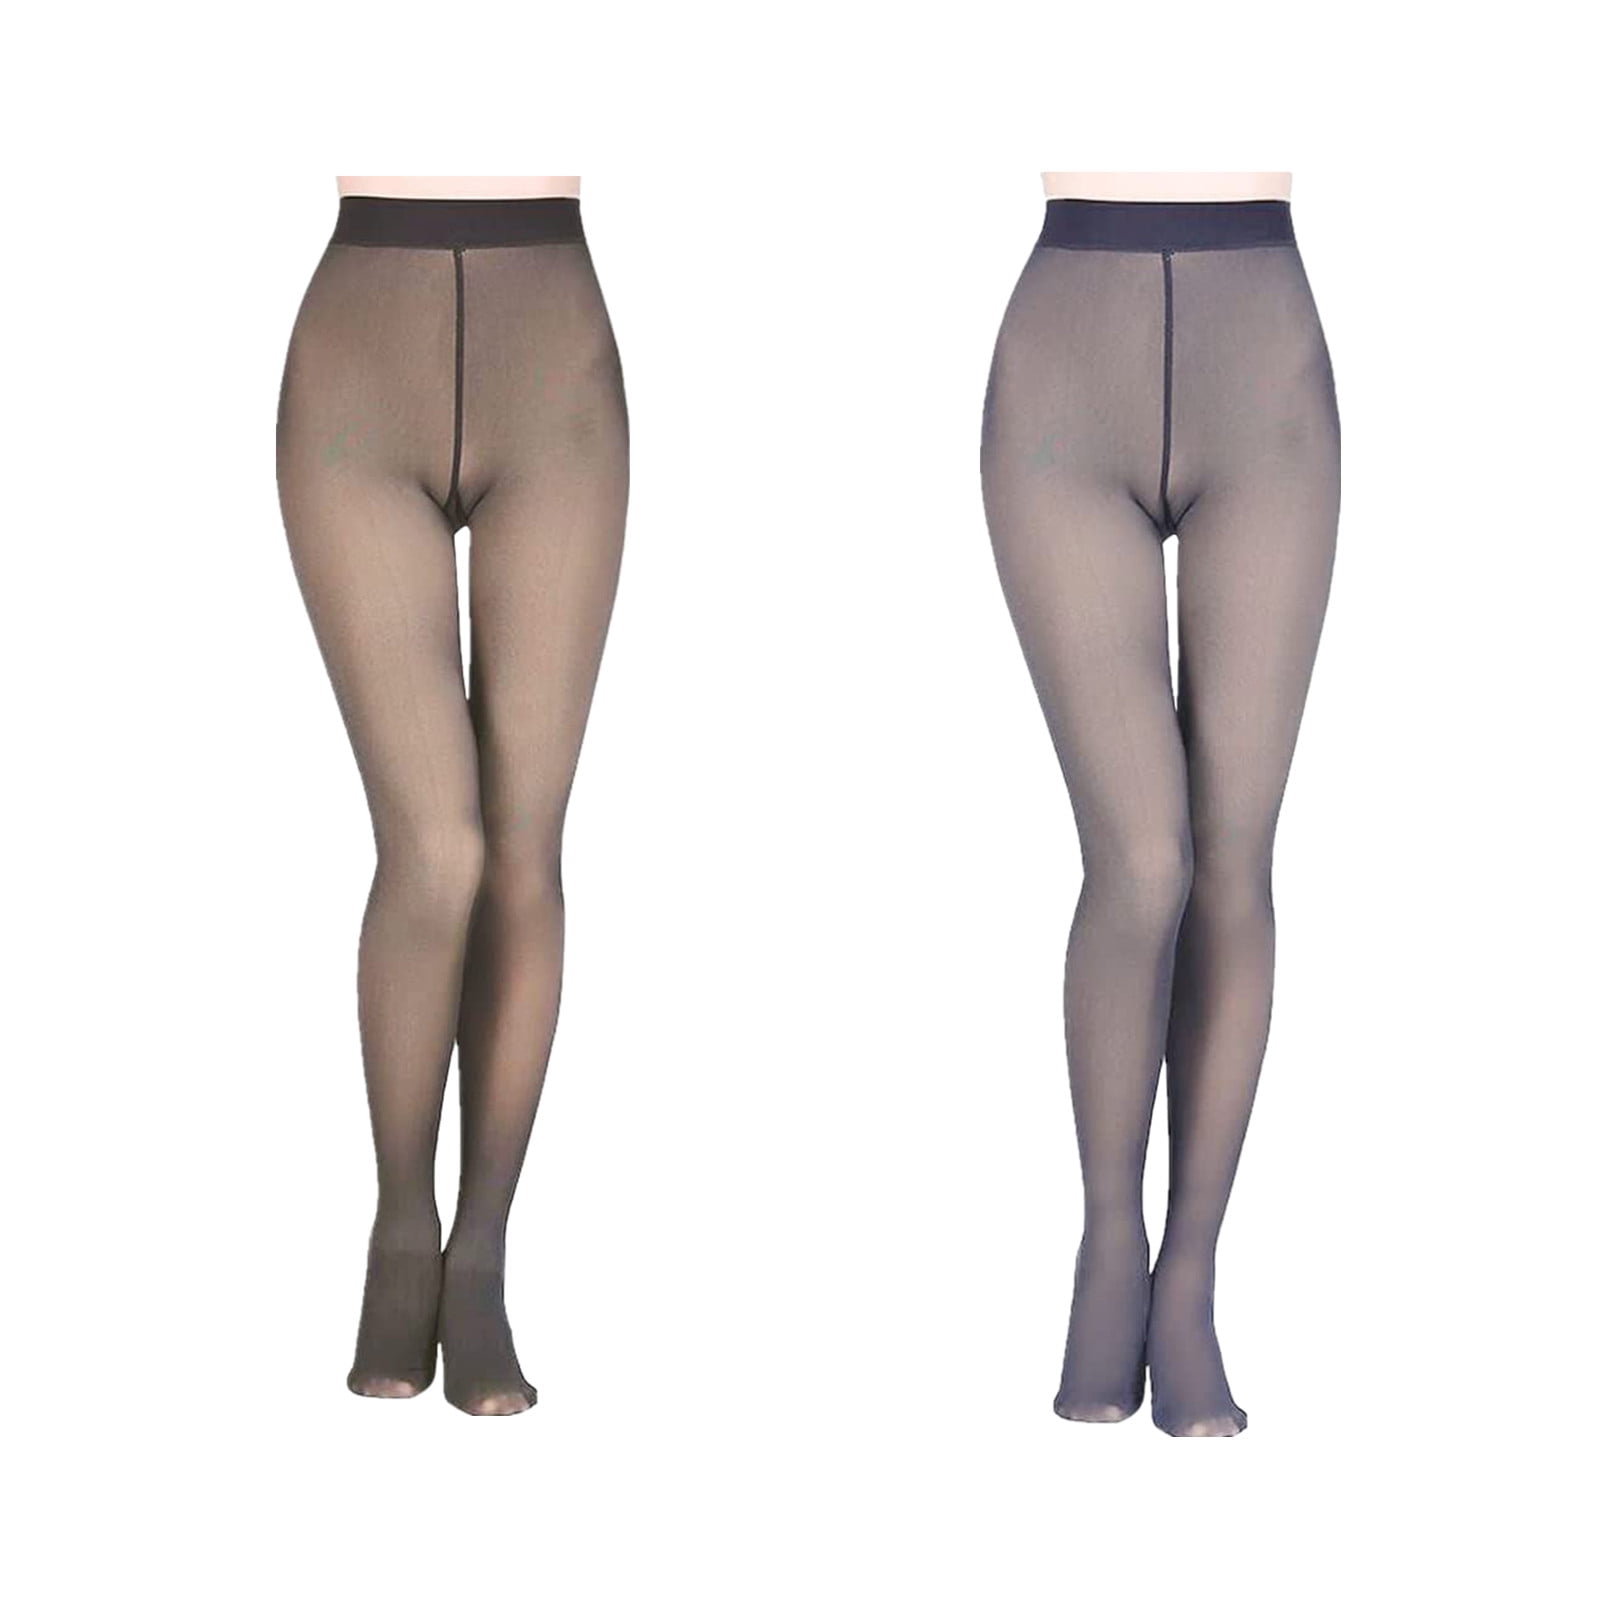 Zhanmai 4 Pcs Fleece Lined Tights Women Footless Fake Thermal Translucent  Leggings Winter Sheer Pantyhose Tights High Waisted